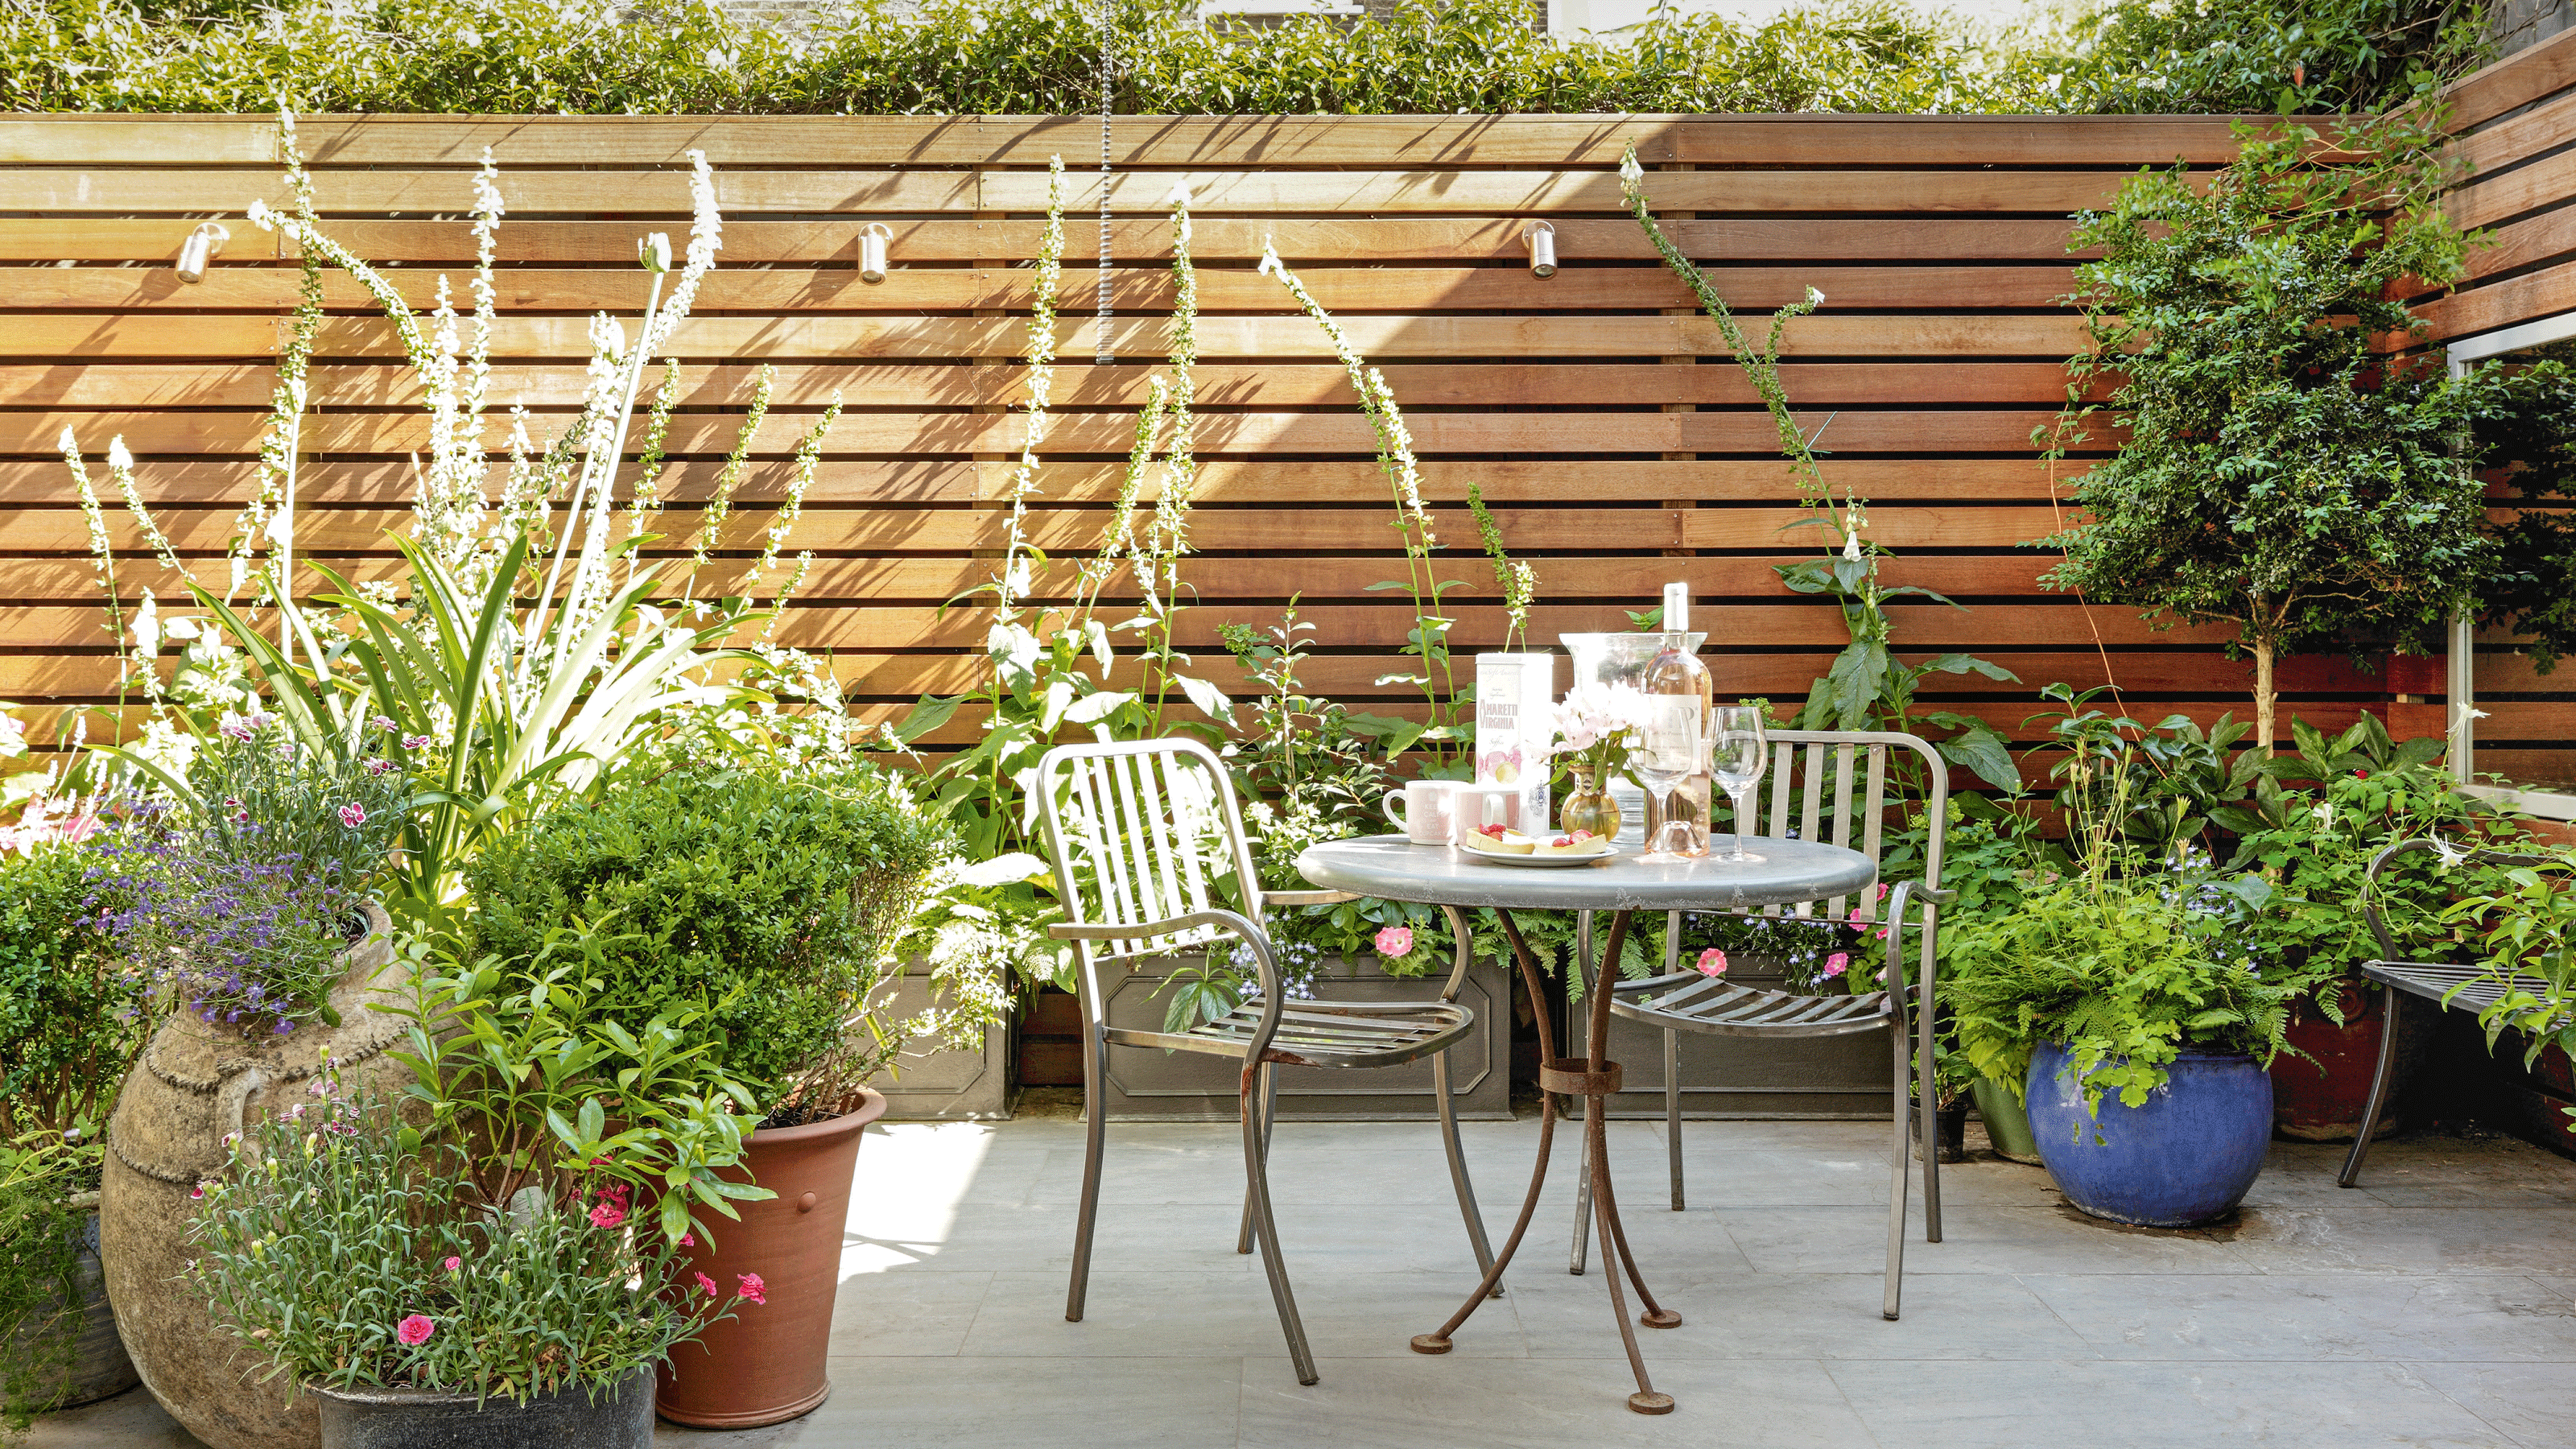 How to arrange pots on a patio - 6 tips for adding plants to a paved over space